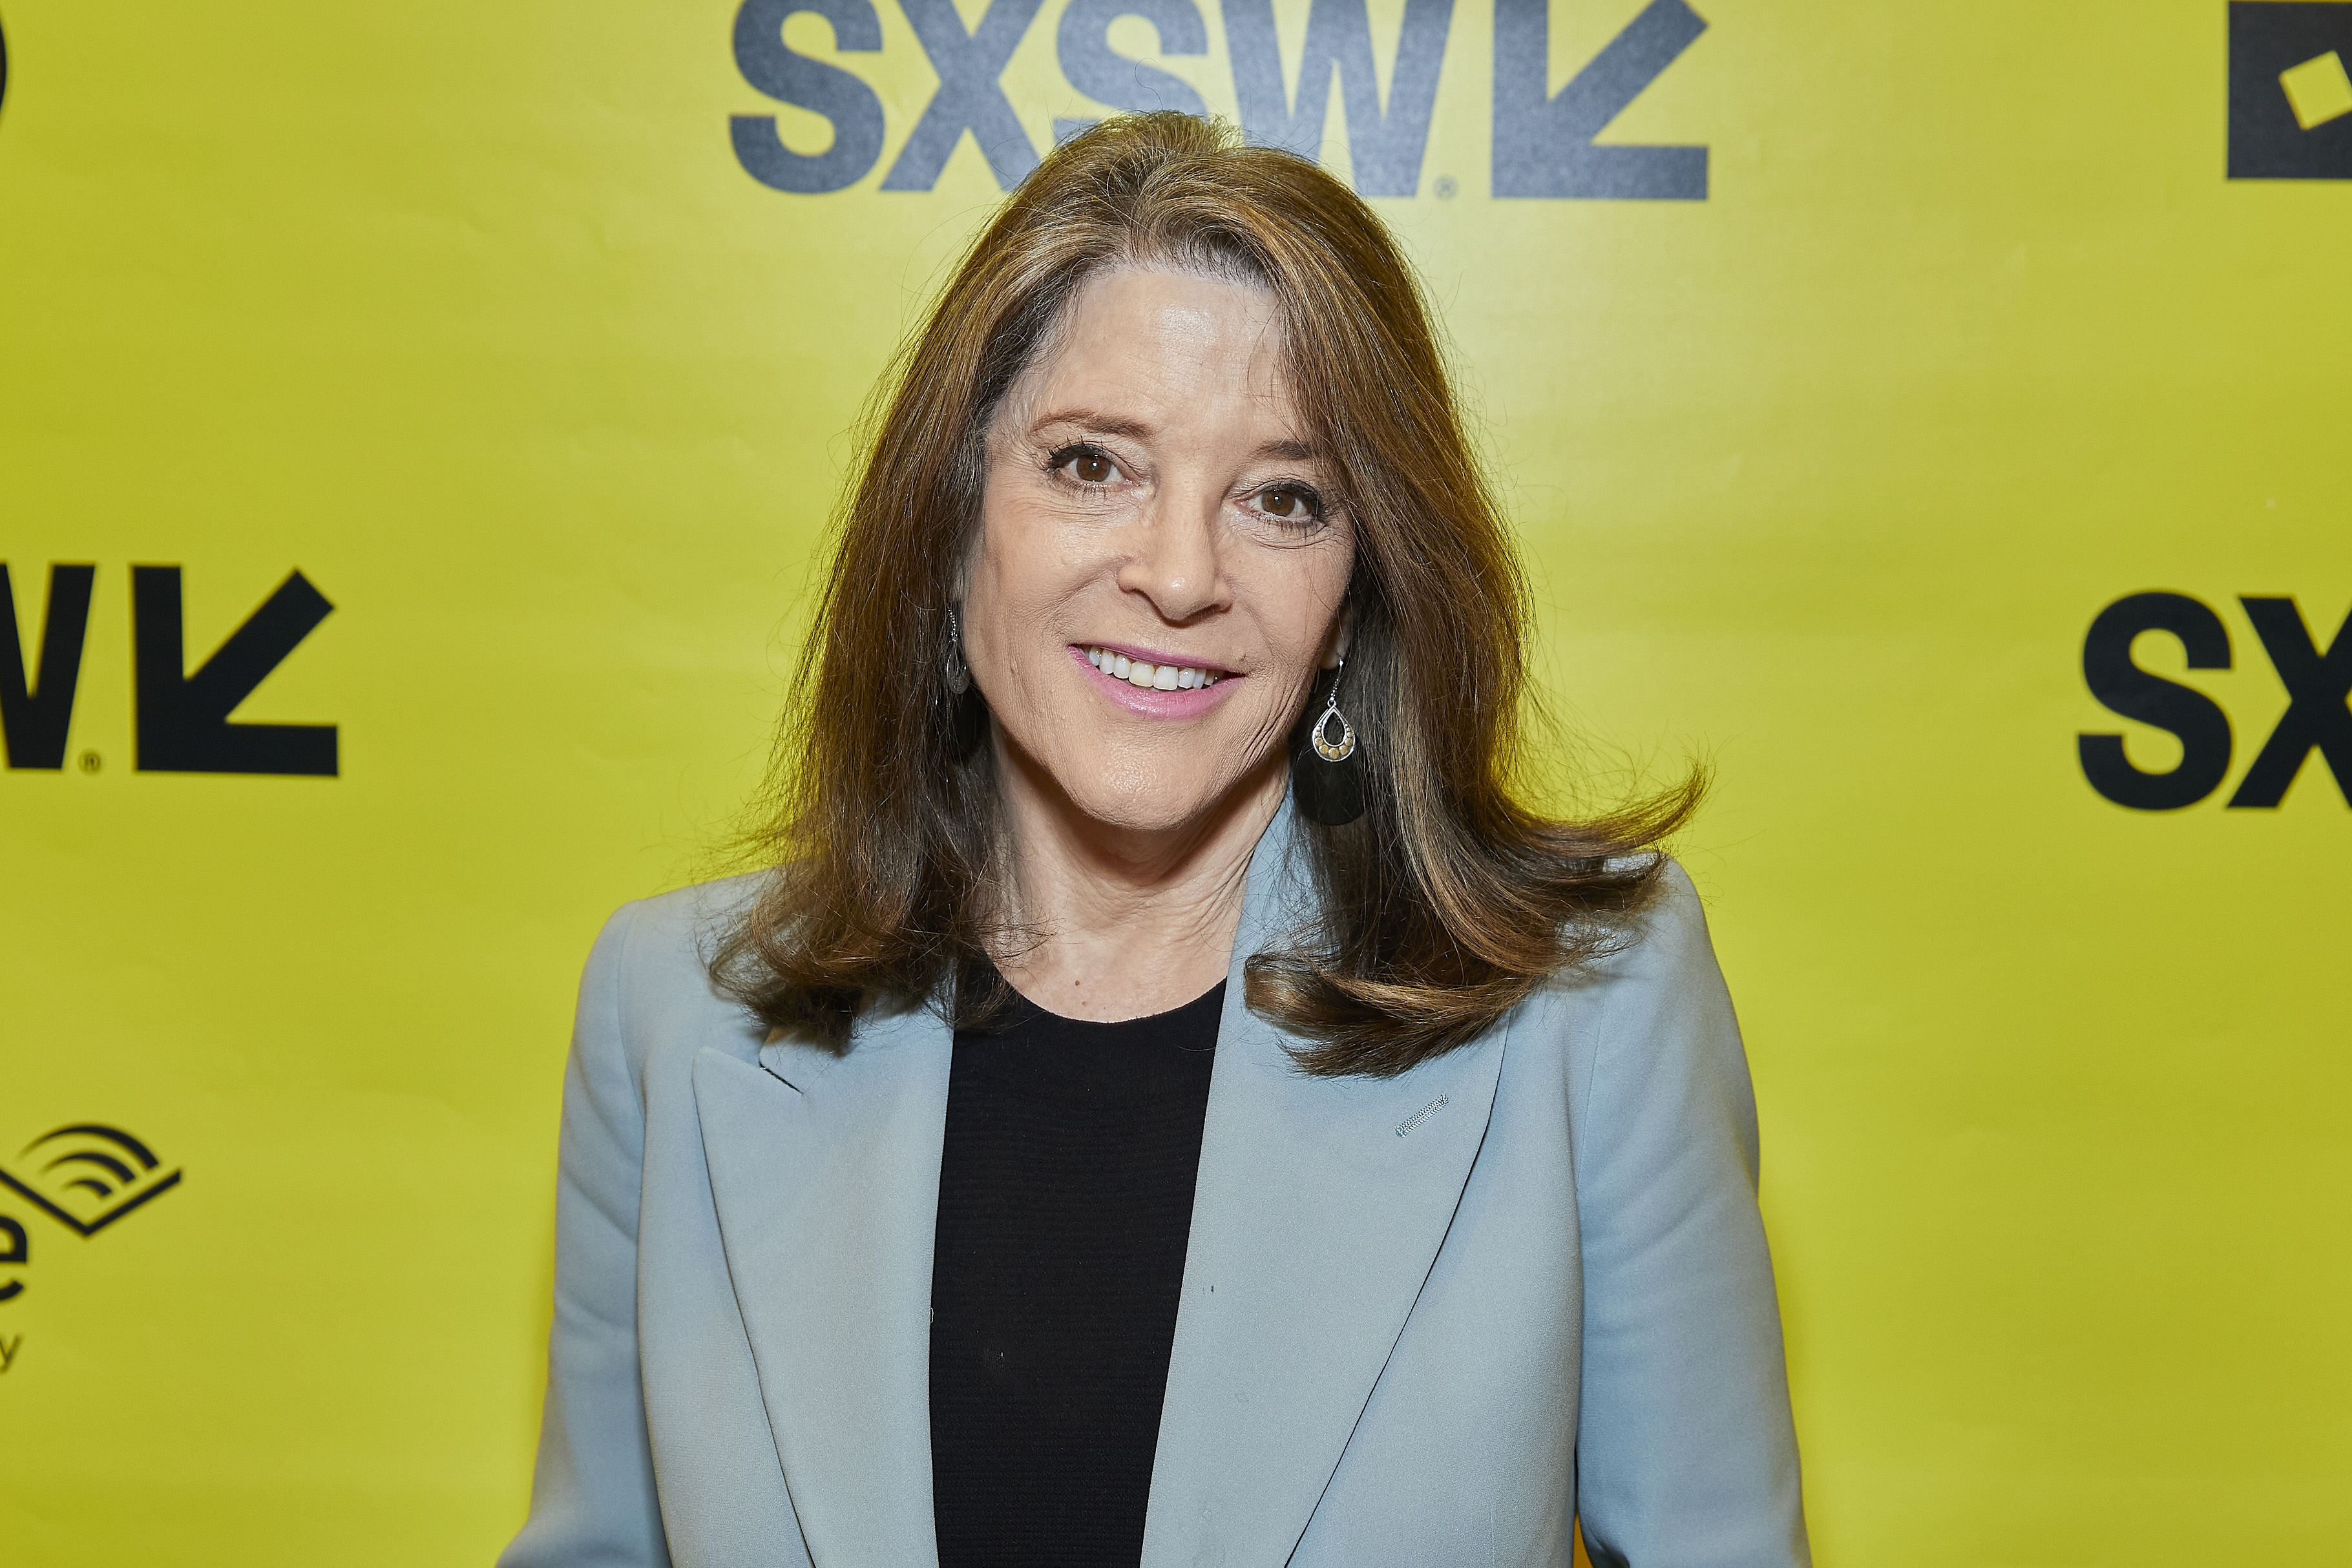 Marianne Williamson at the Guerrilla Tactics & Asymmetric Political Activism during the 2022 SXSW Conference and Festivals on March 14, 2022, in Austin, Texas. | Source: Getty Images